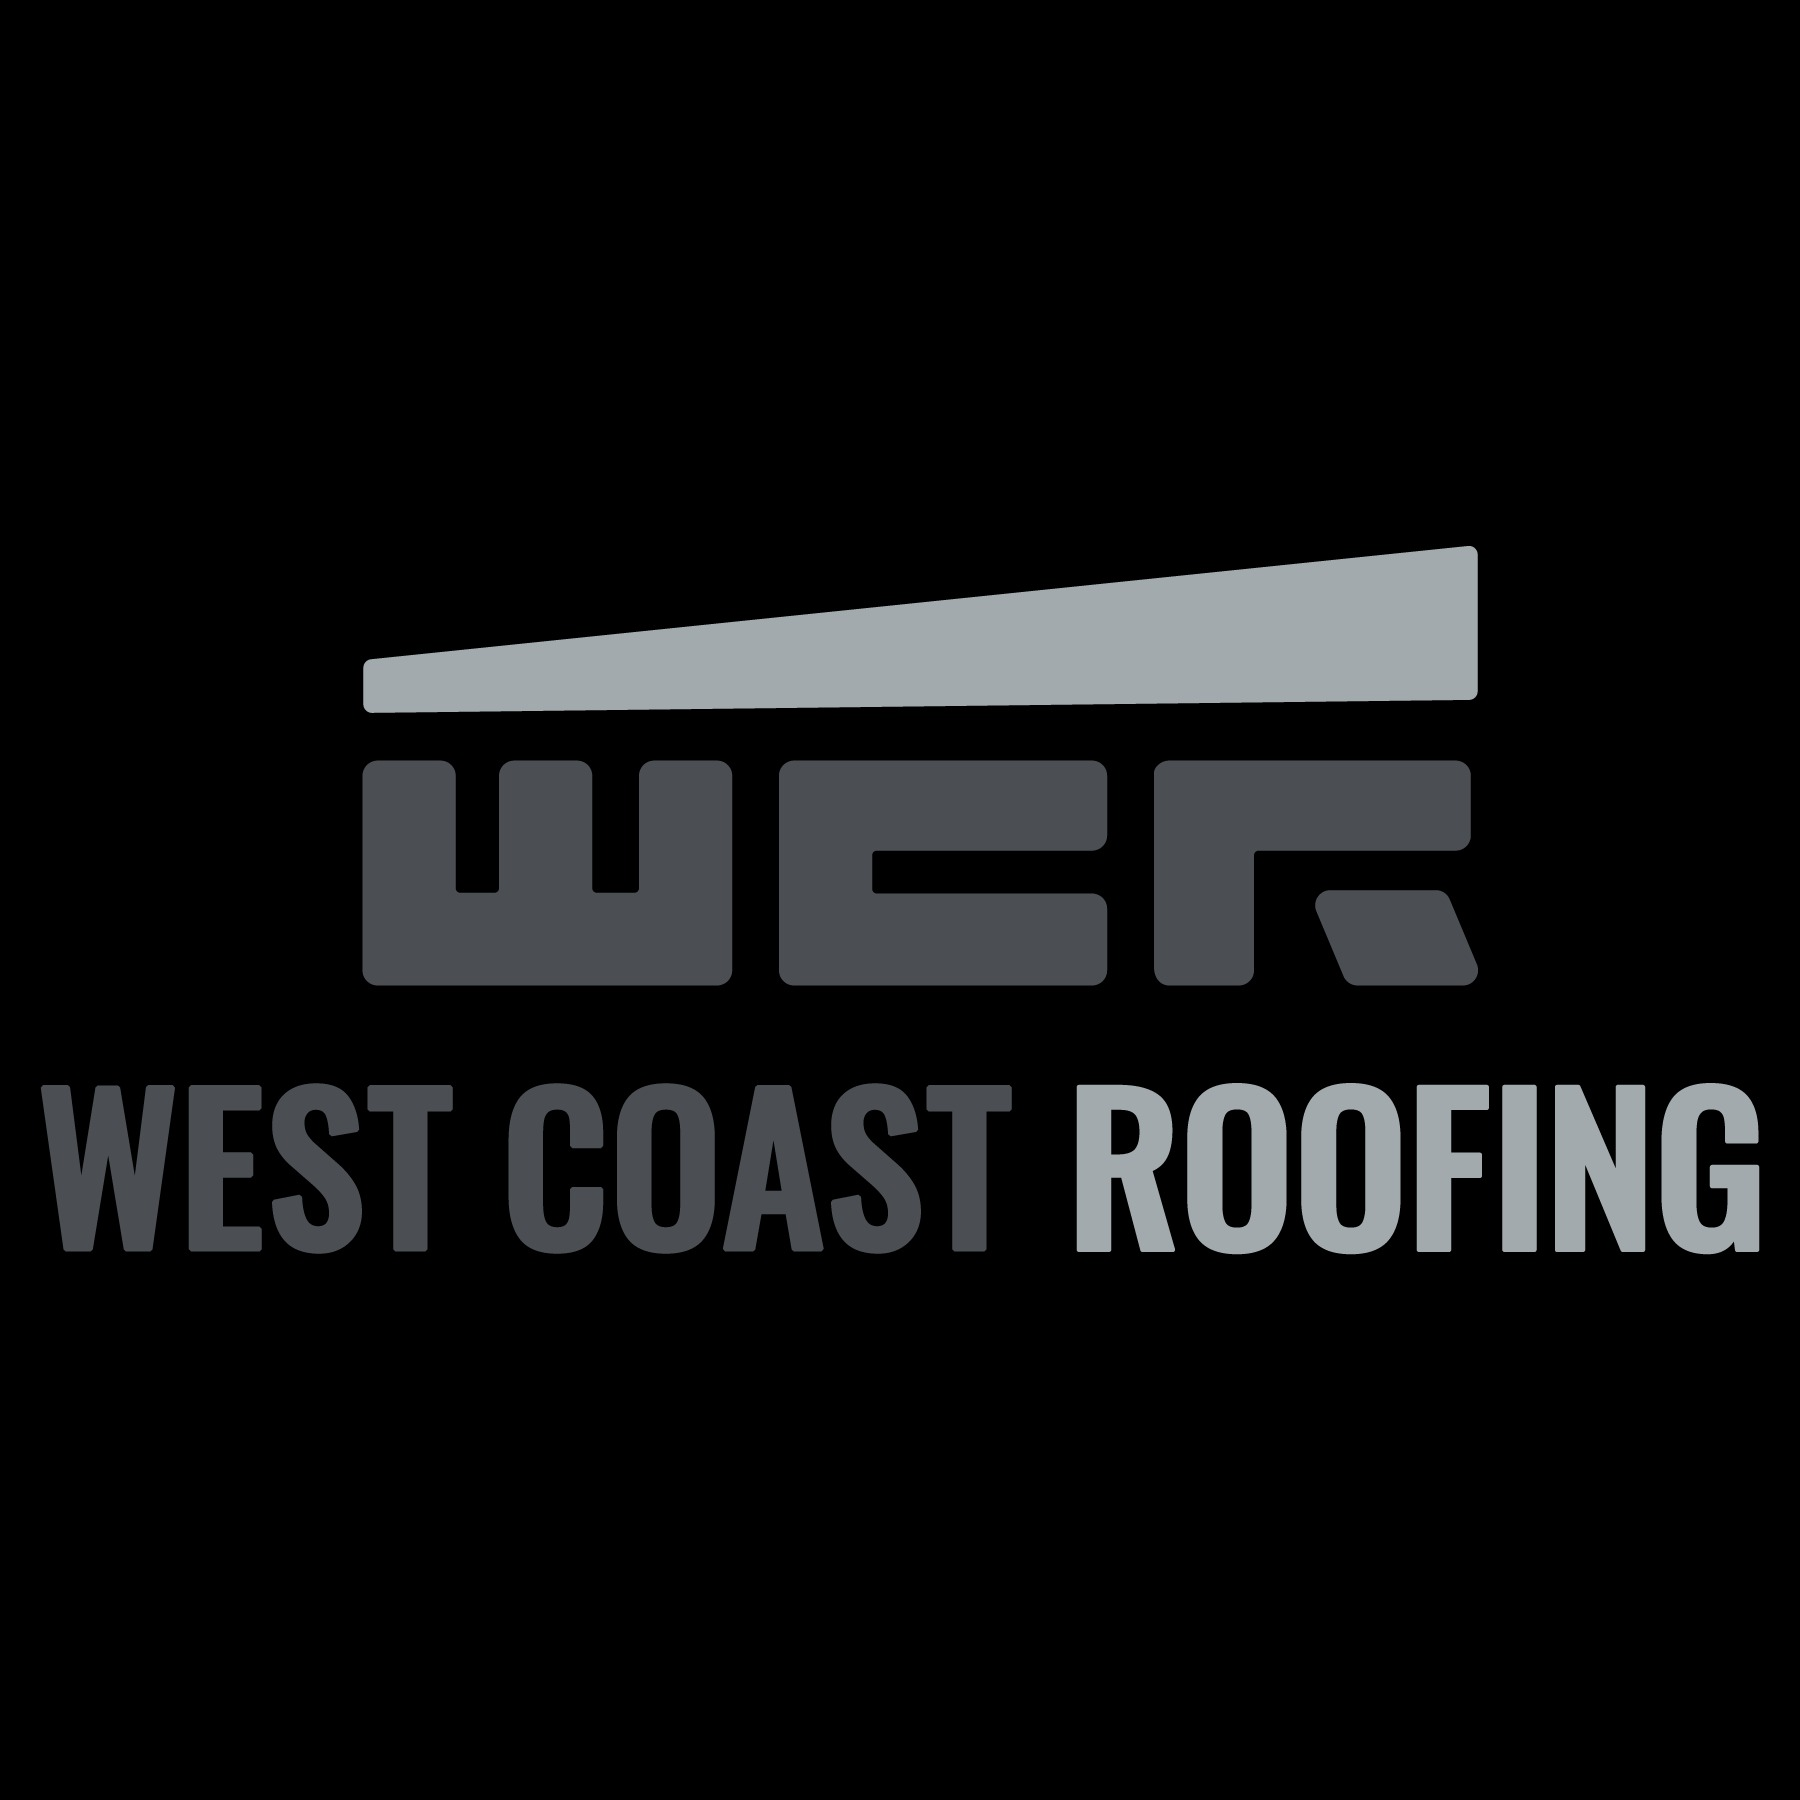 West Coast Roofing Co - Los Angeles, CA 90023 - (323)261-7193 | ShowMeLocal.com